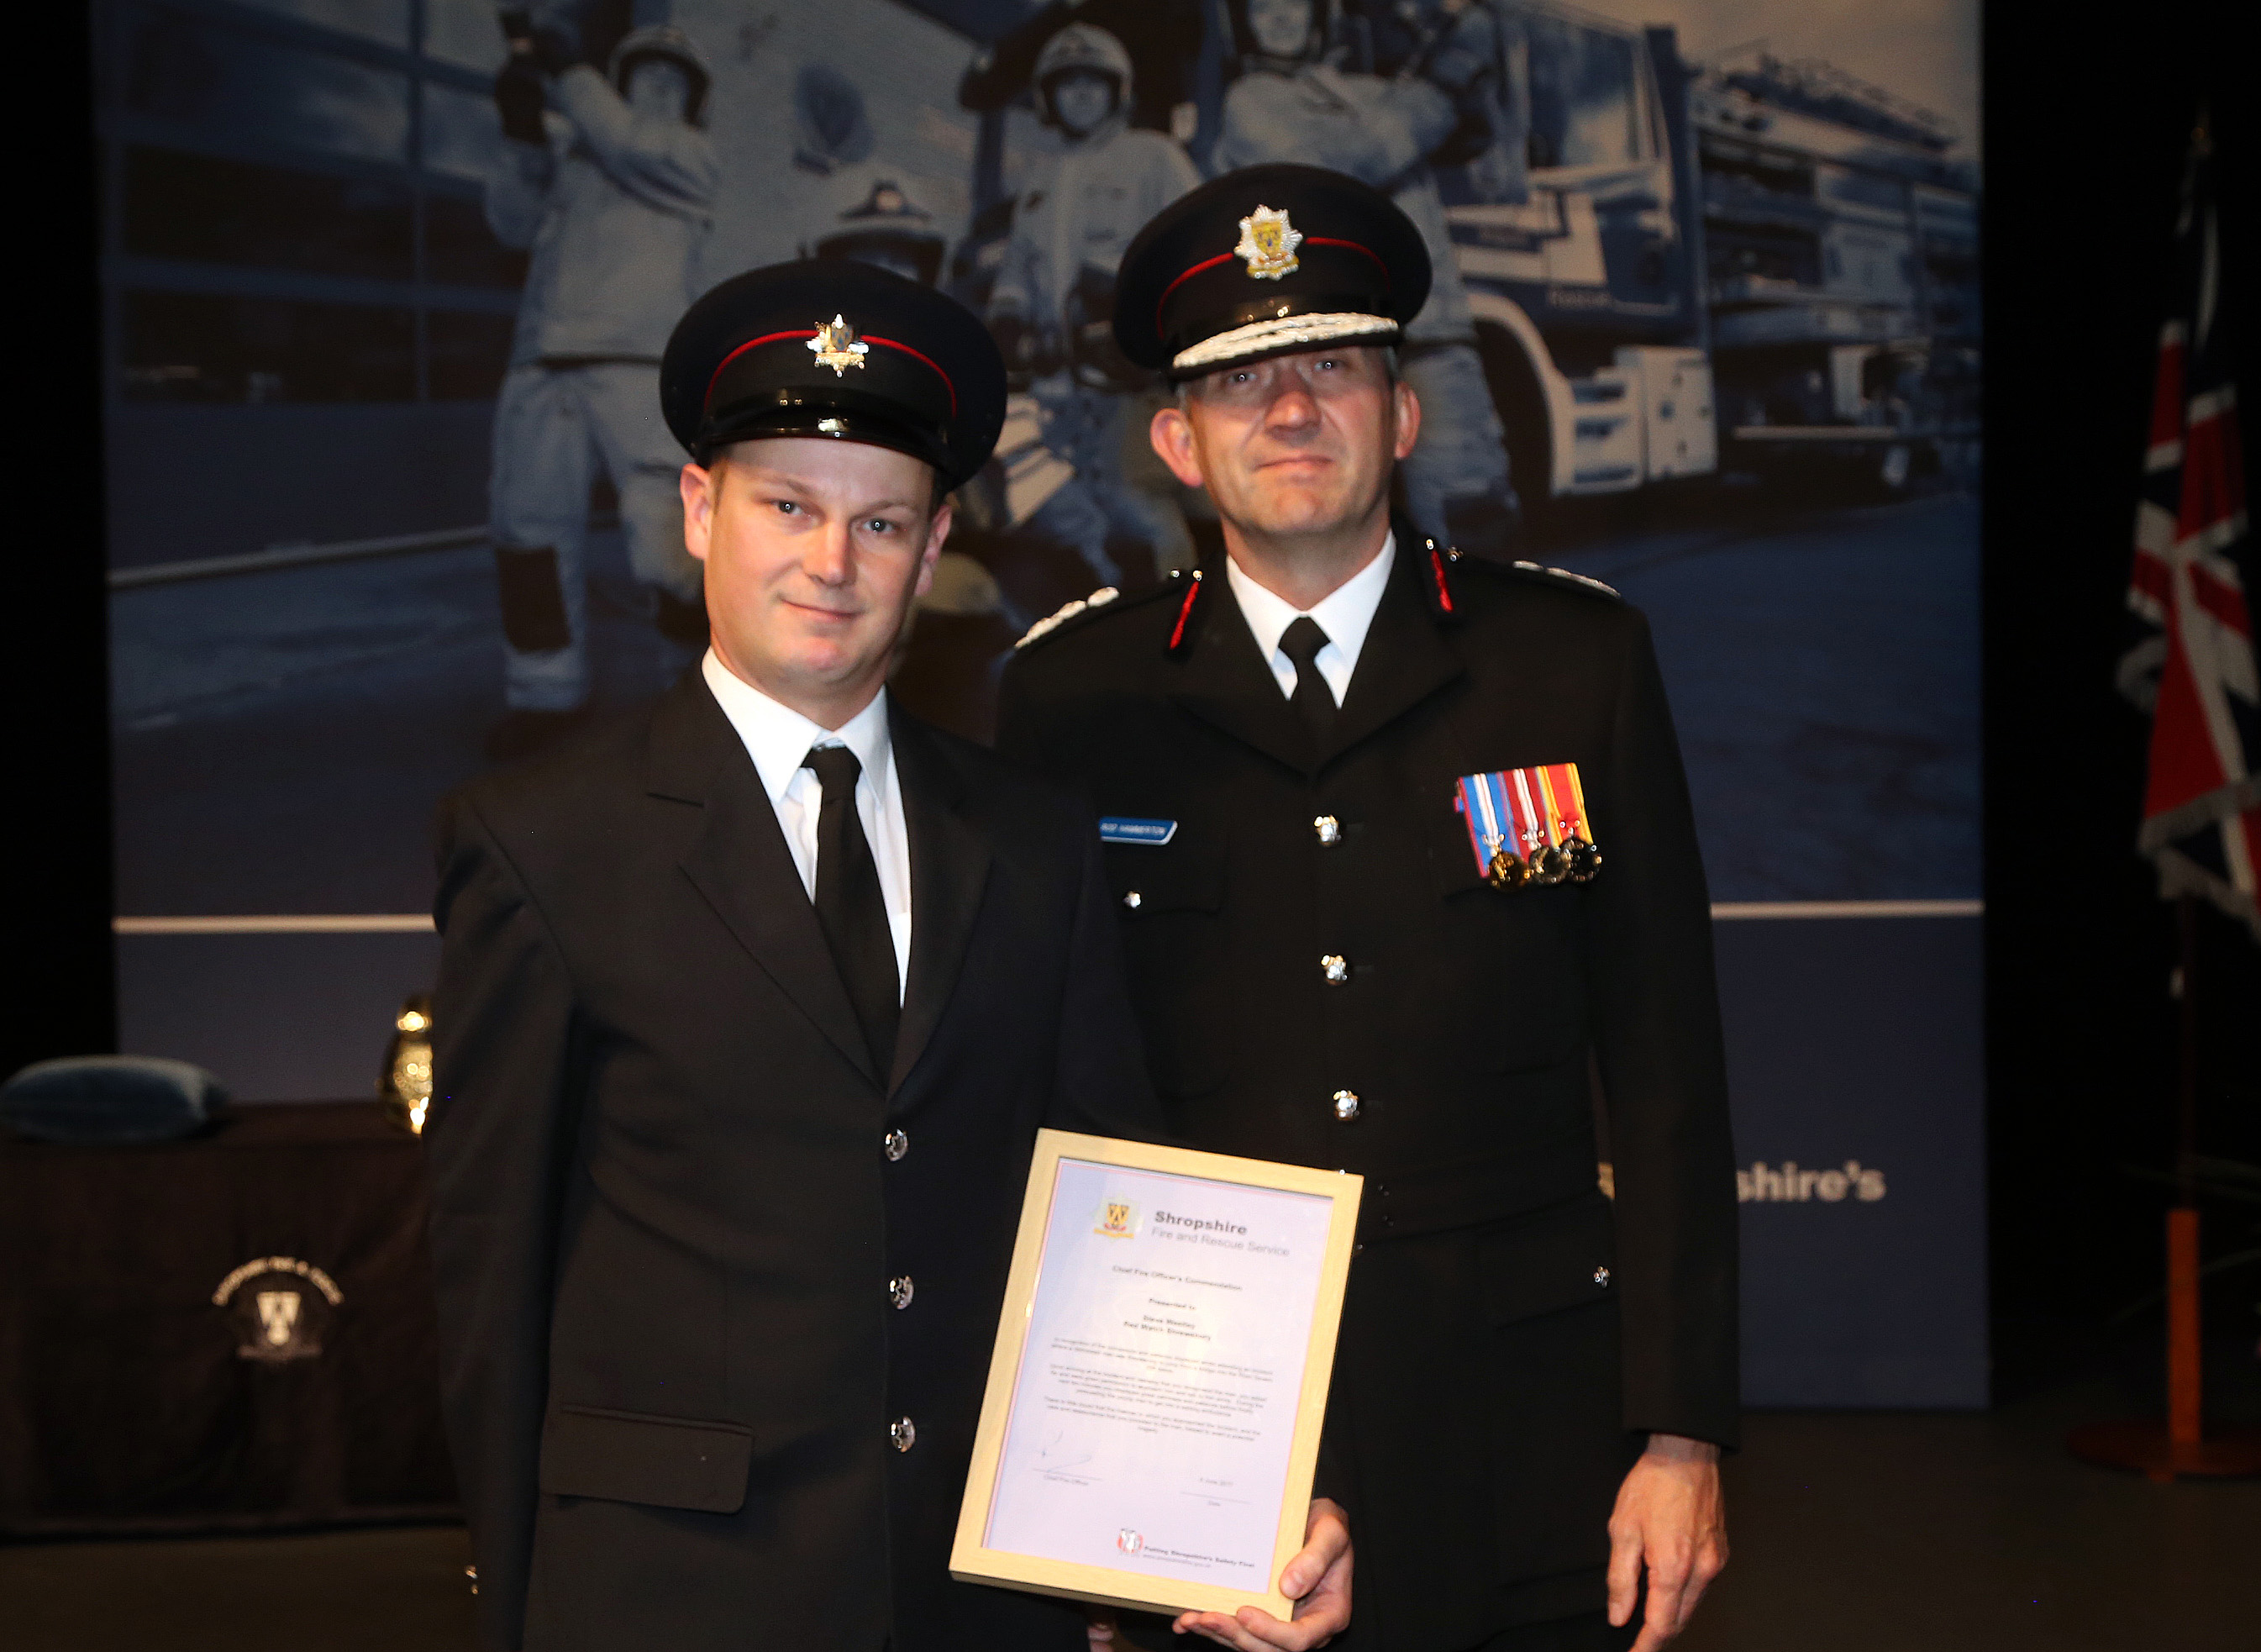 Shrewsbury firefighter Steve Westley receives the Chief Fire Officer’s Commendation from Rod Hammerton for his “cool-headed” actions in talking down a young man who was preparing to jump from a bridge into the River Severn.